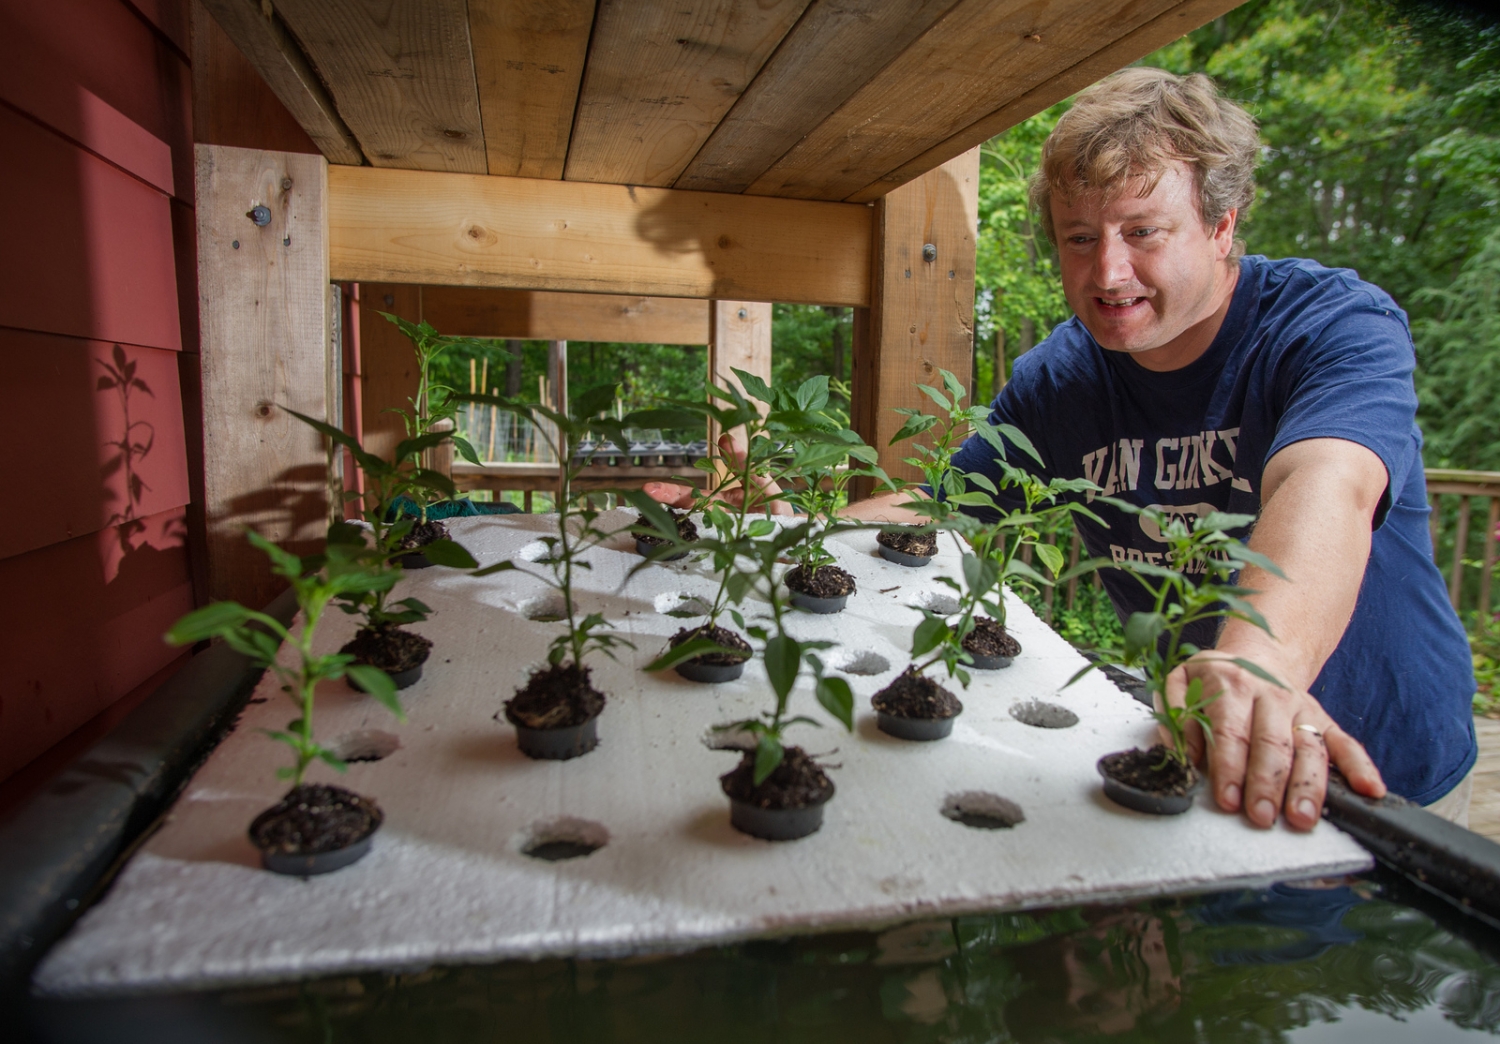 Steven Van Ginkel tends to an aquaponics system he constructed. He envisions having one on campus.